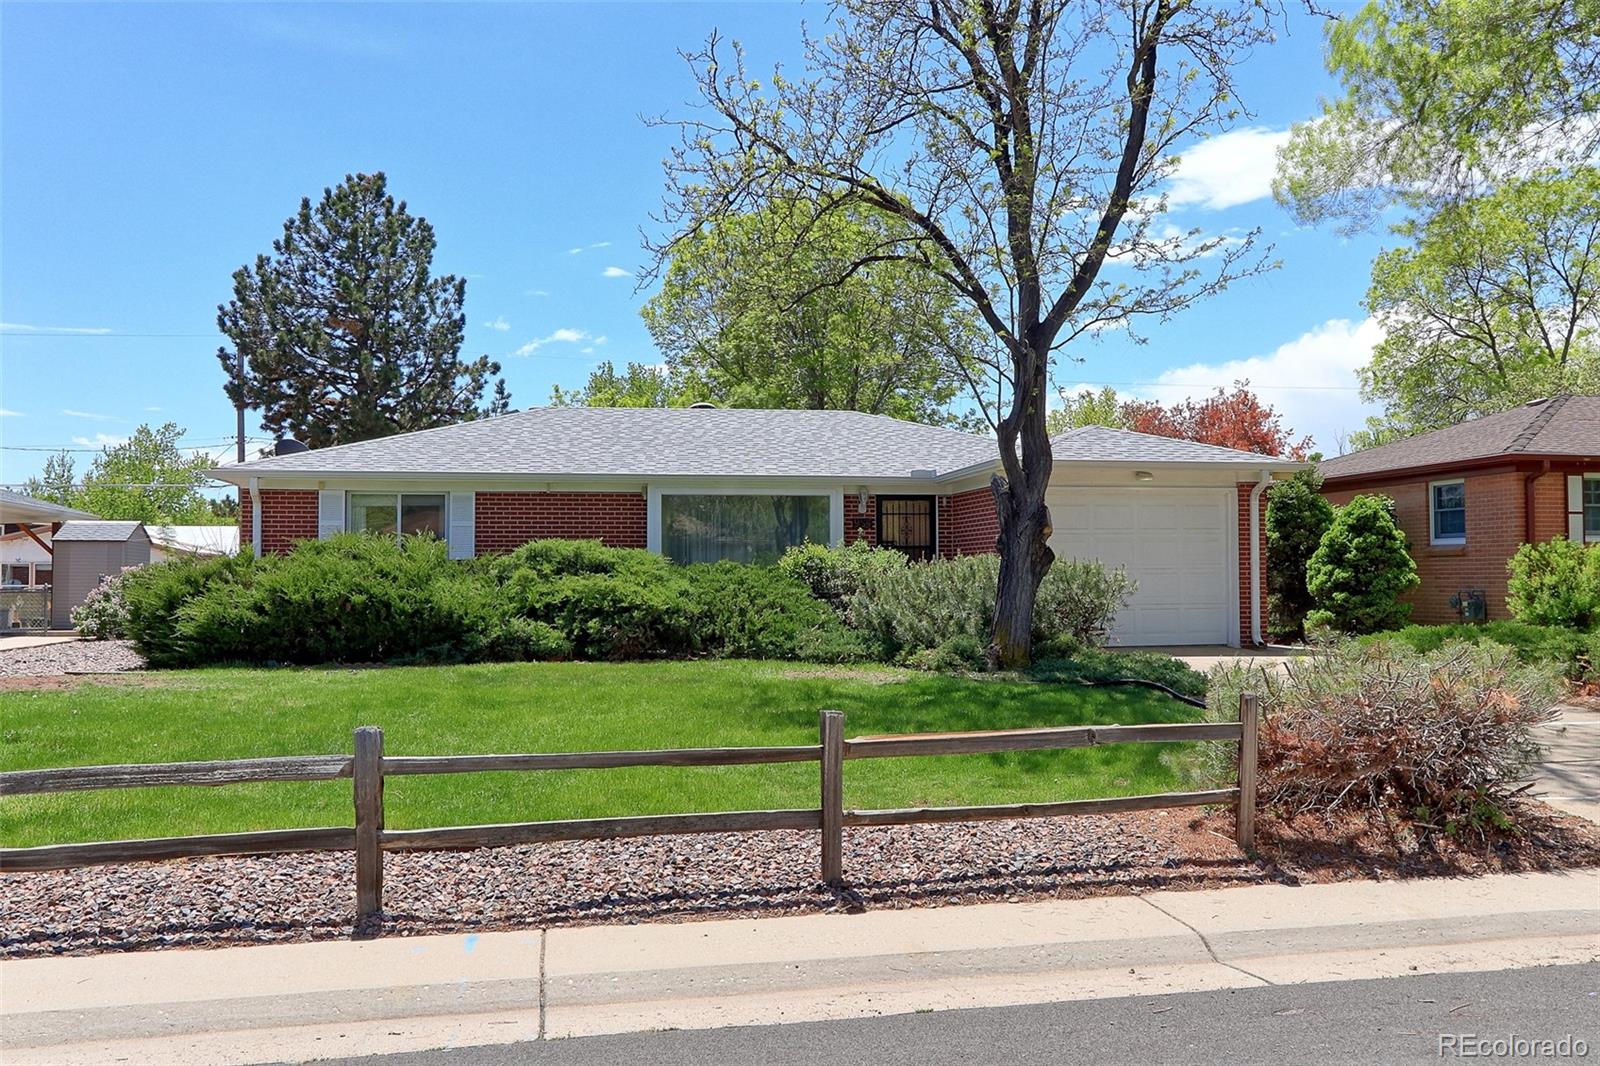 984 e 9th avenue, broomfield sold home. Closed on 2024-06-13 for $486,000.